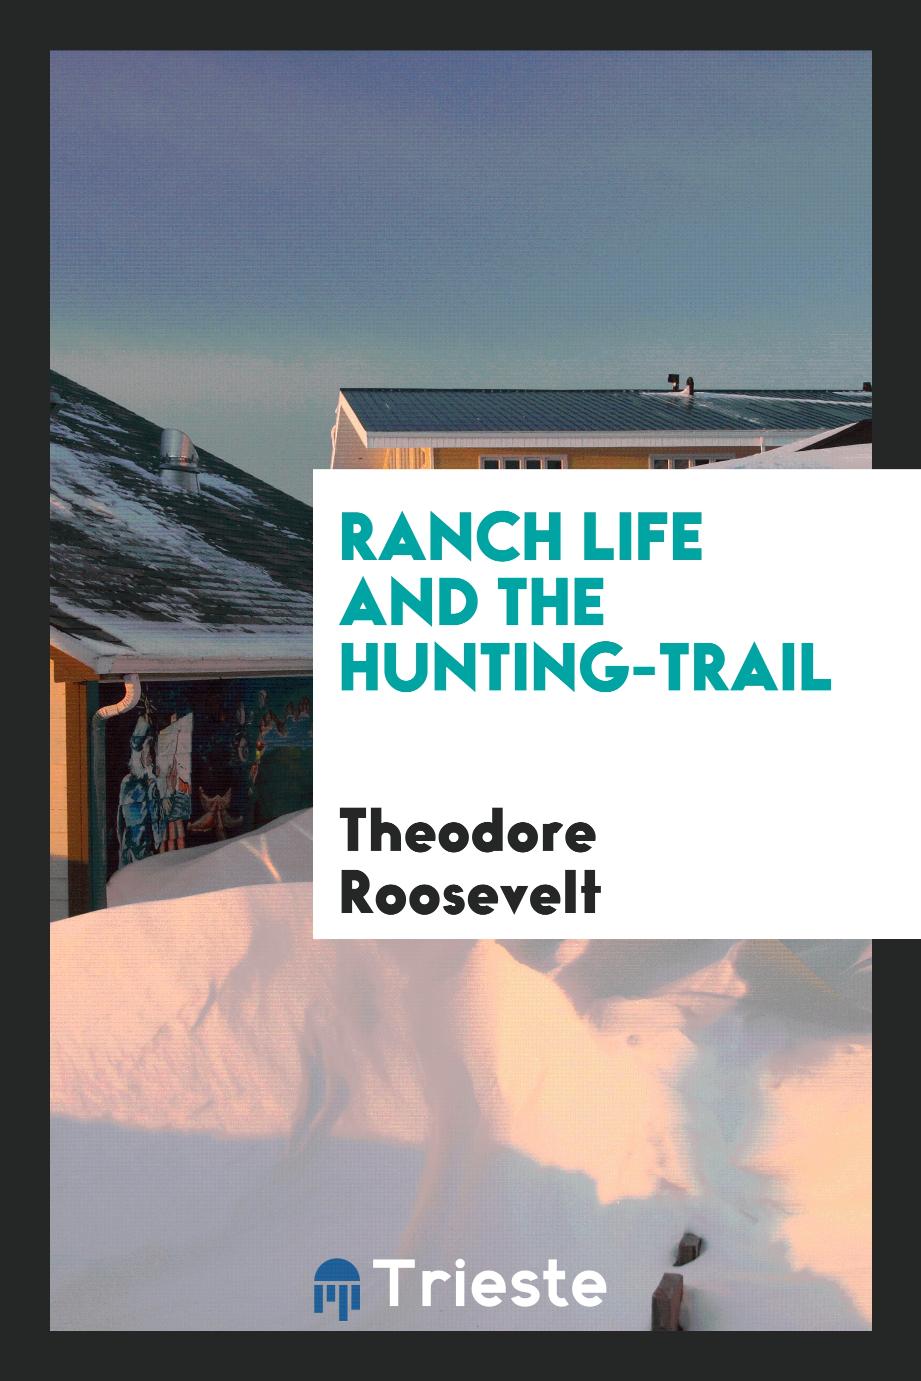 Ranch life and the hunting-trail